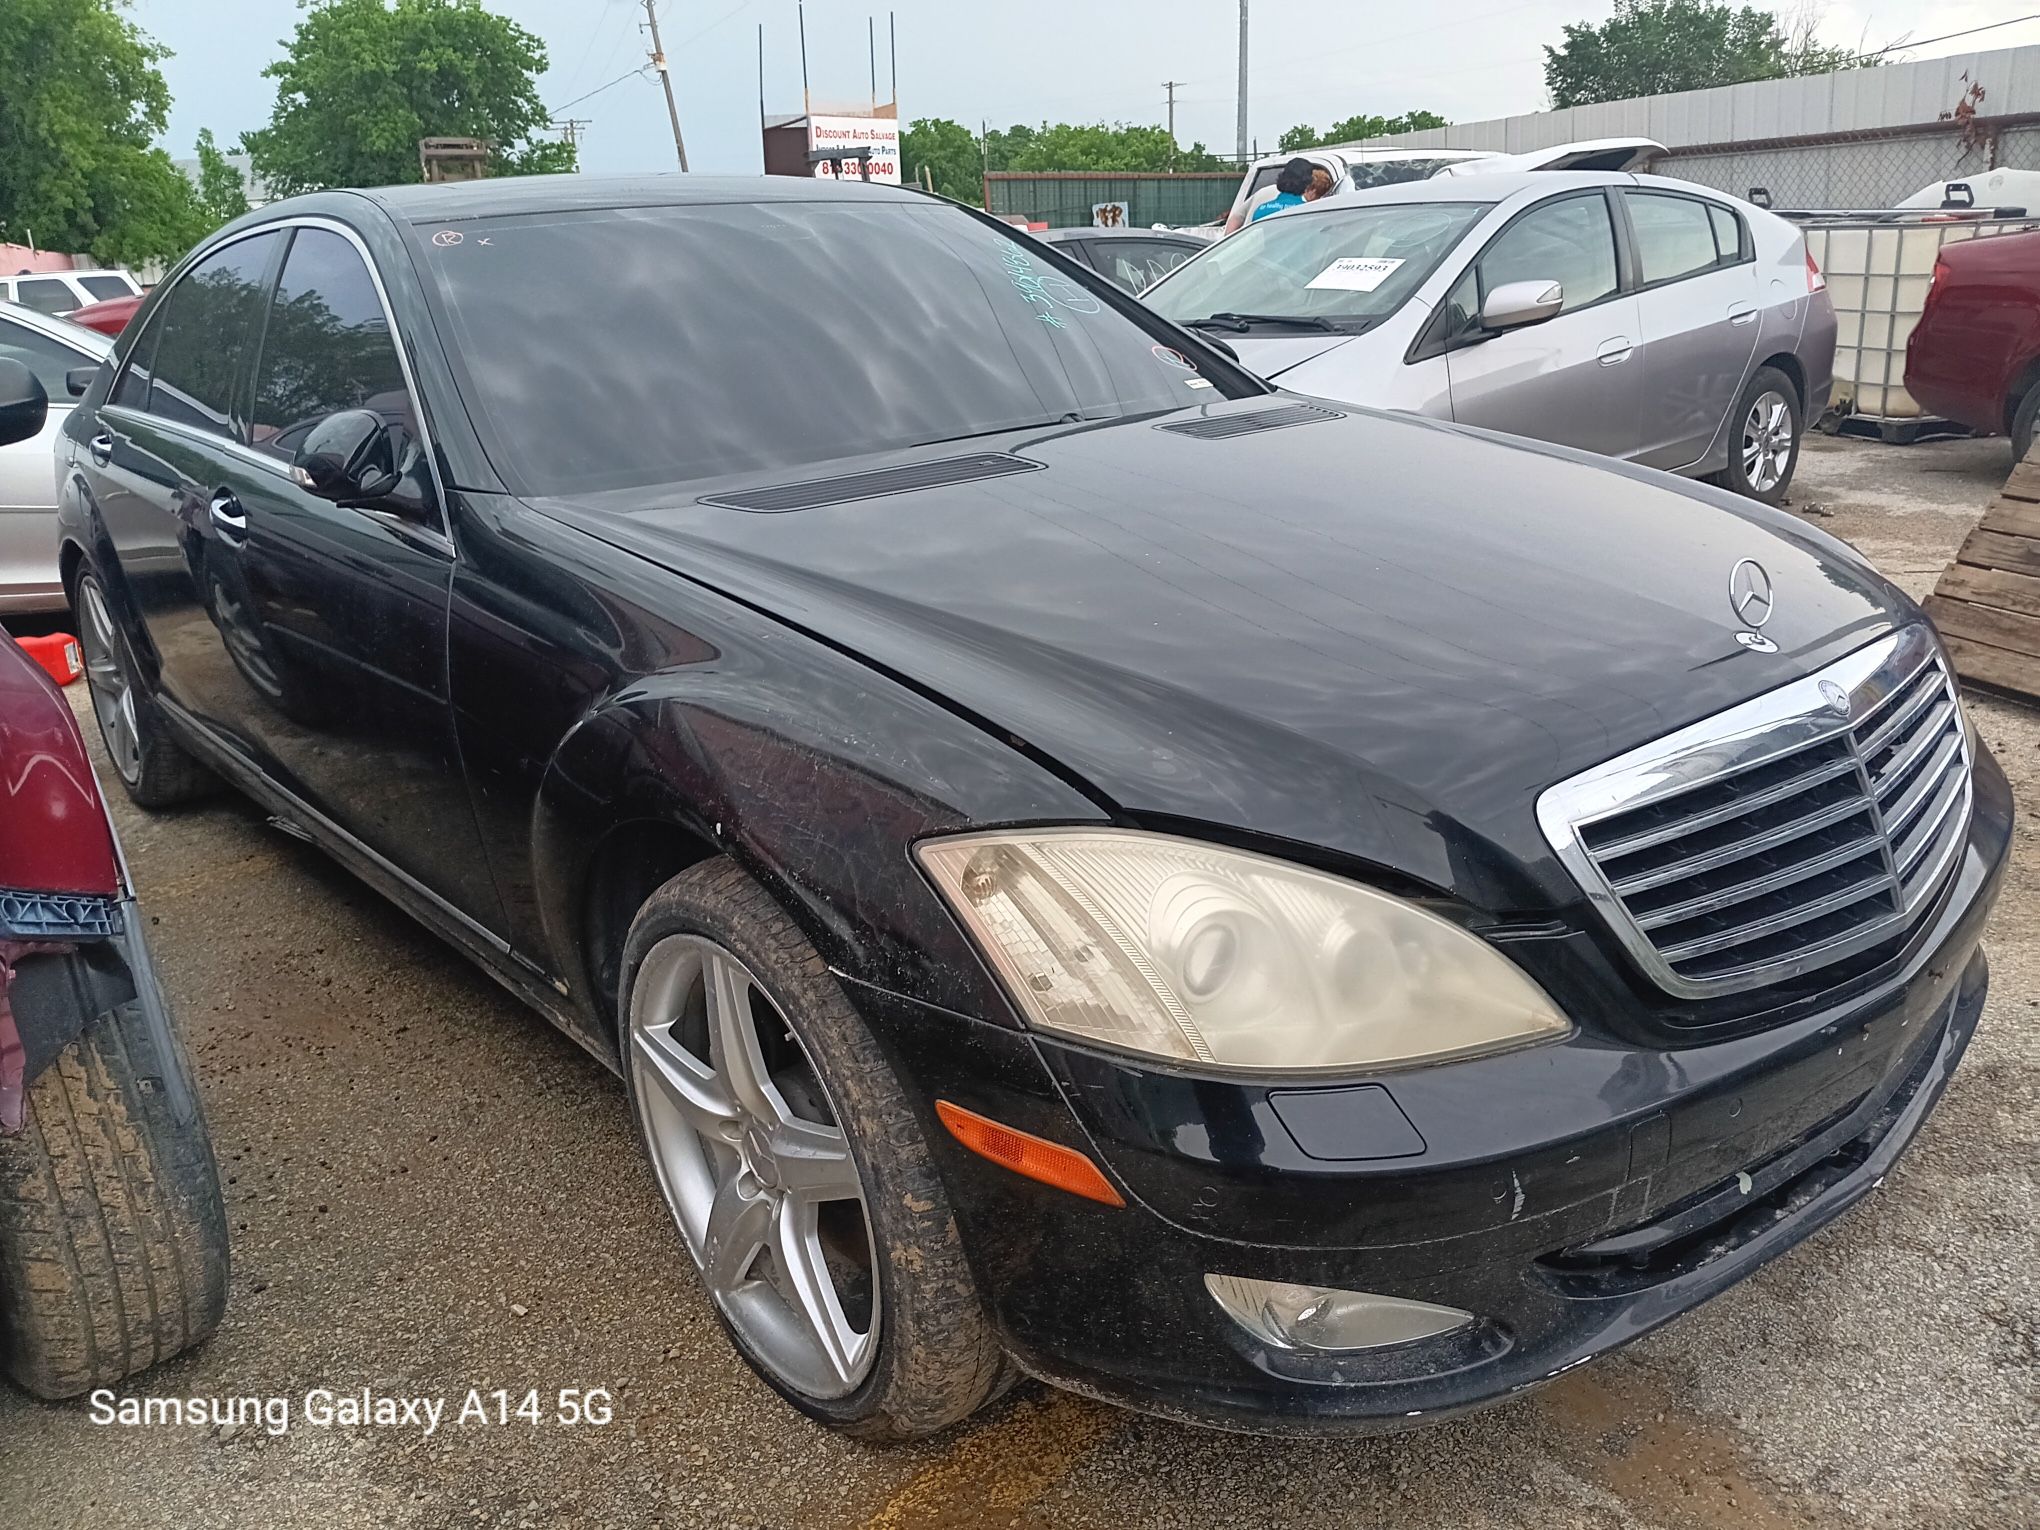 2007 Mercedes S550 - Parts Only #DF3